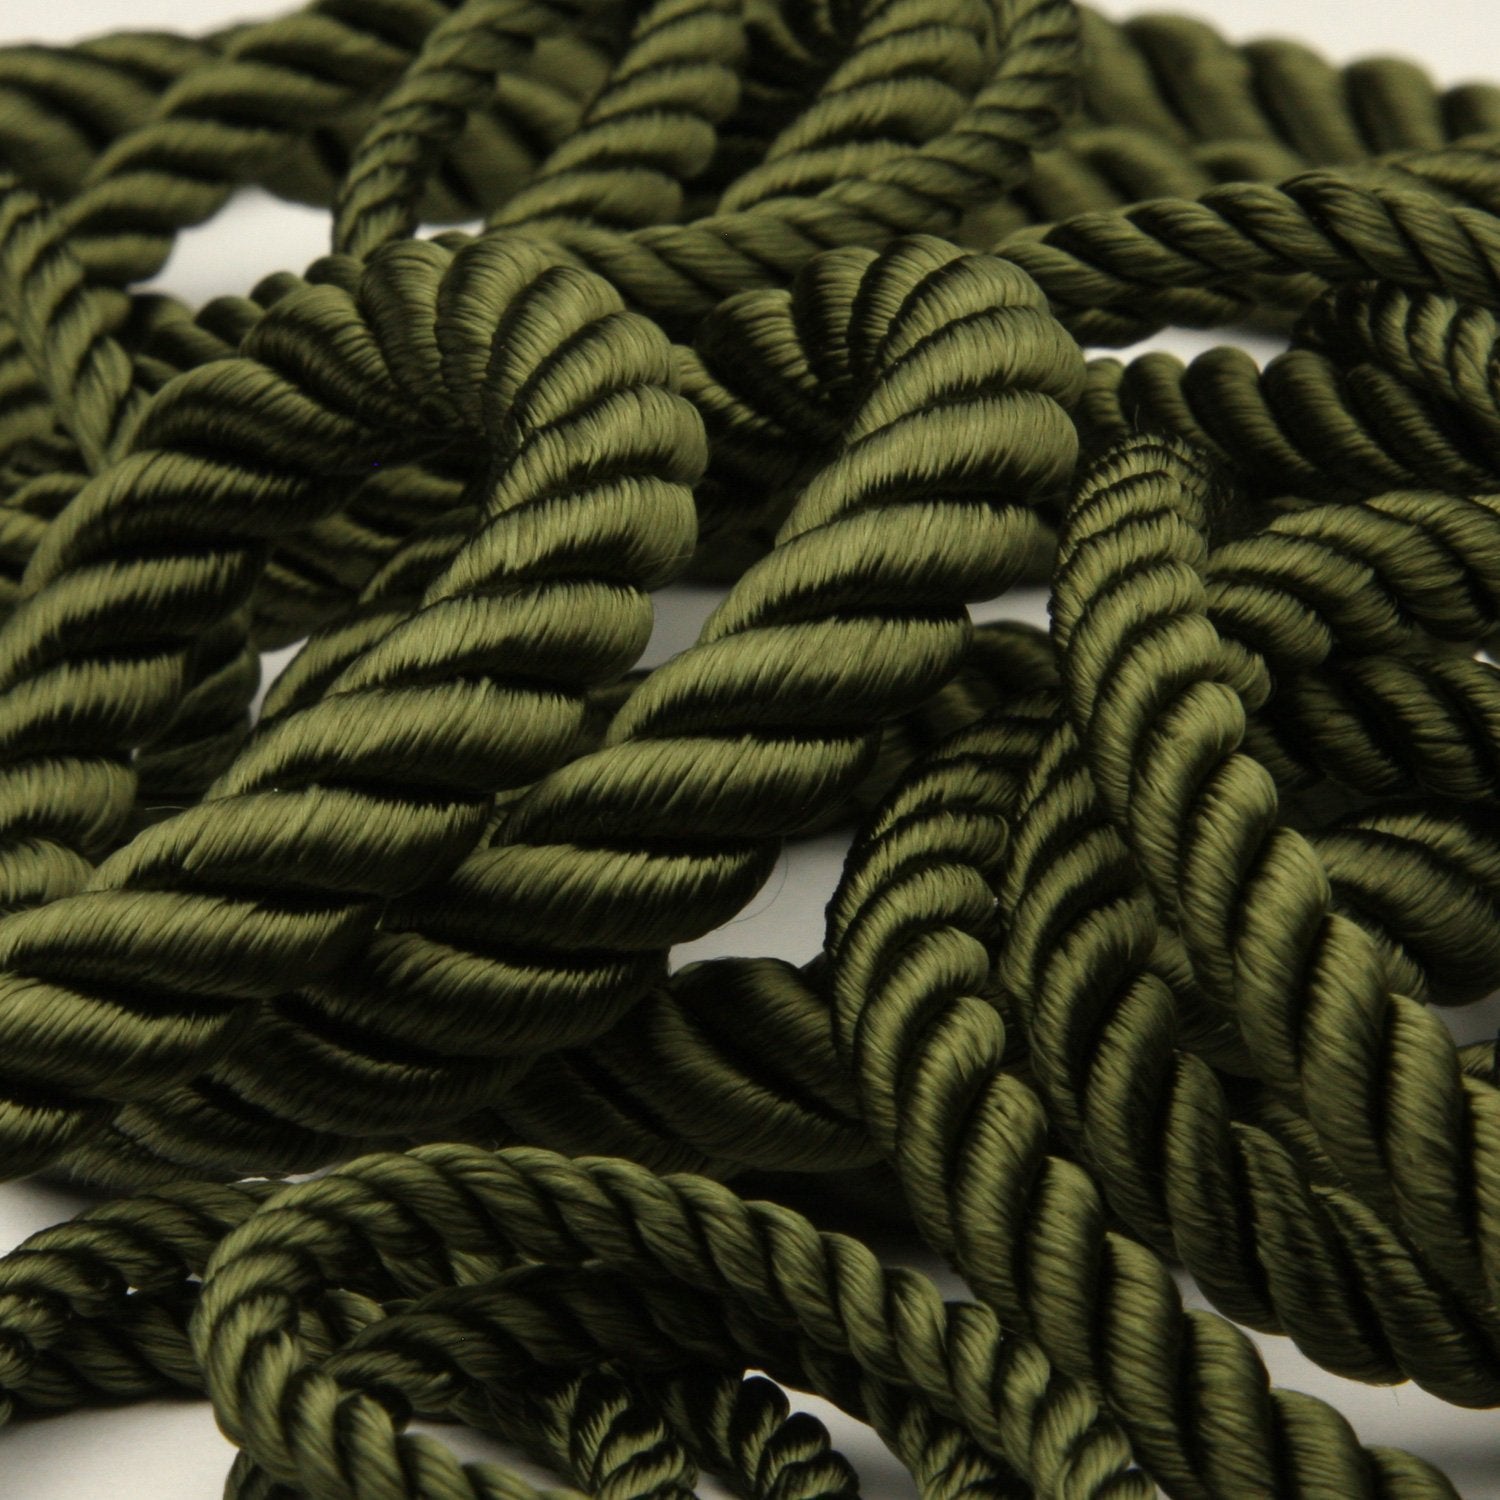 Wholesale] Rayon Twist Cord approx.10mm (13/32) 30 Meters Roll